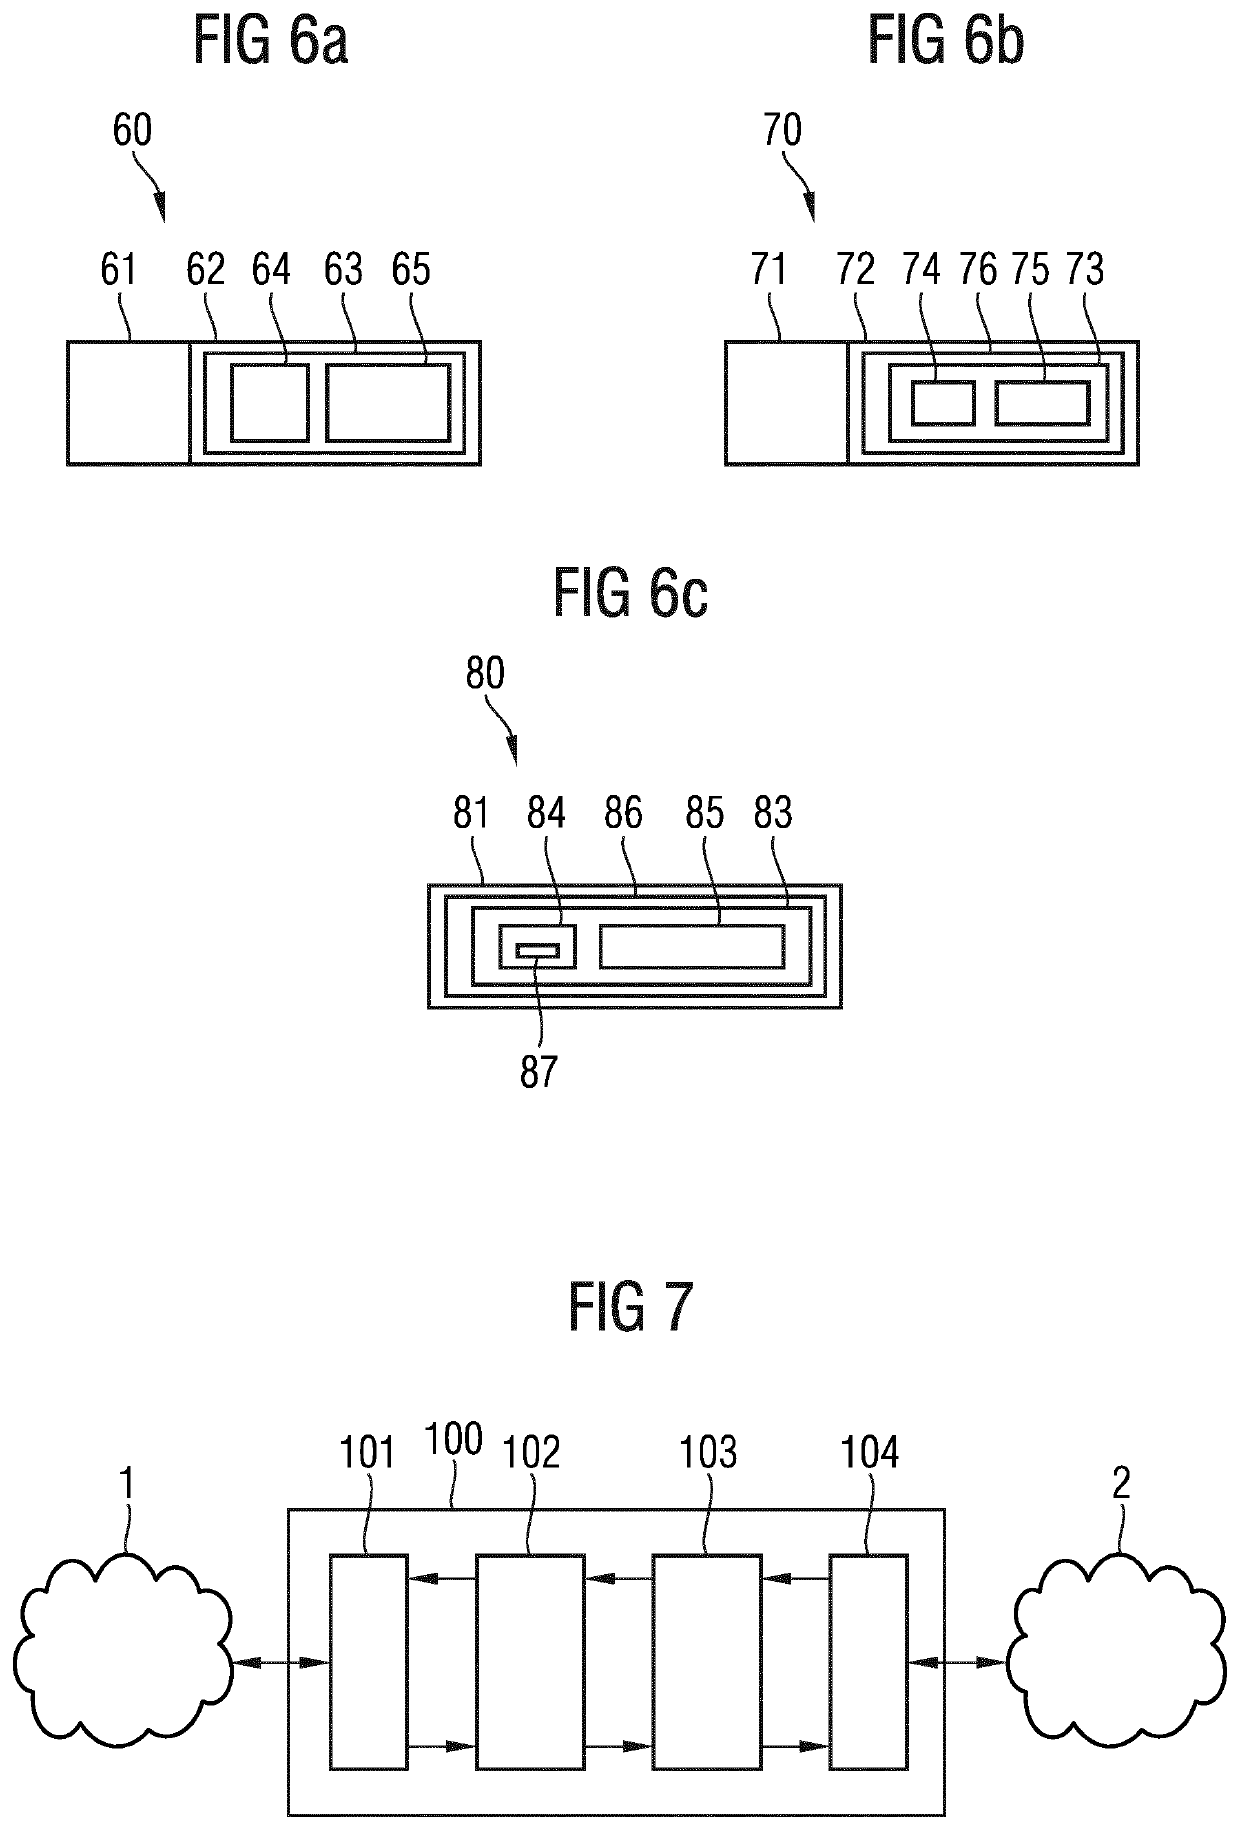 Method and device for establishing an end-to-end communication between two networks